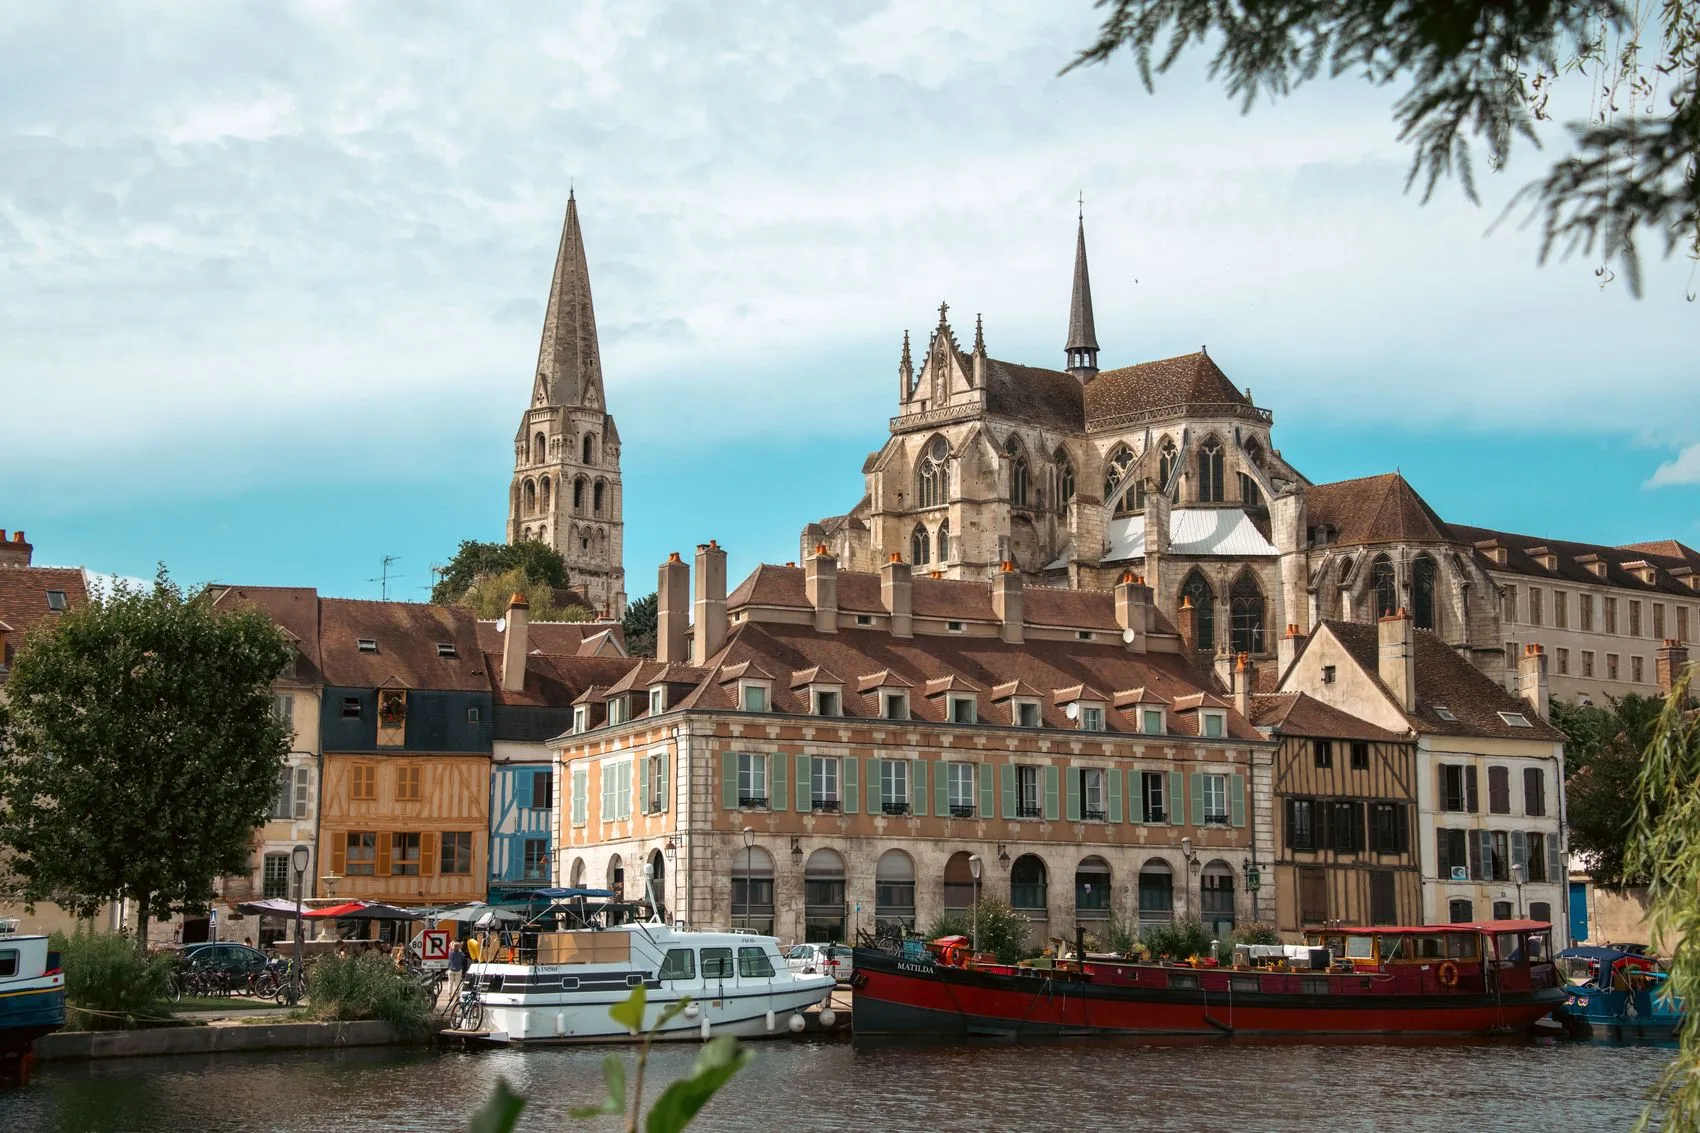 View of Saint-Germain Abbey from the quays with barges and timber-framed houses